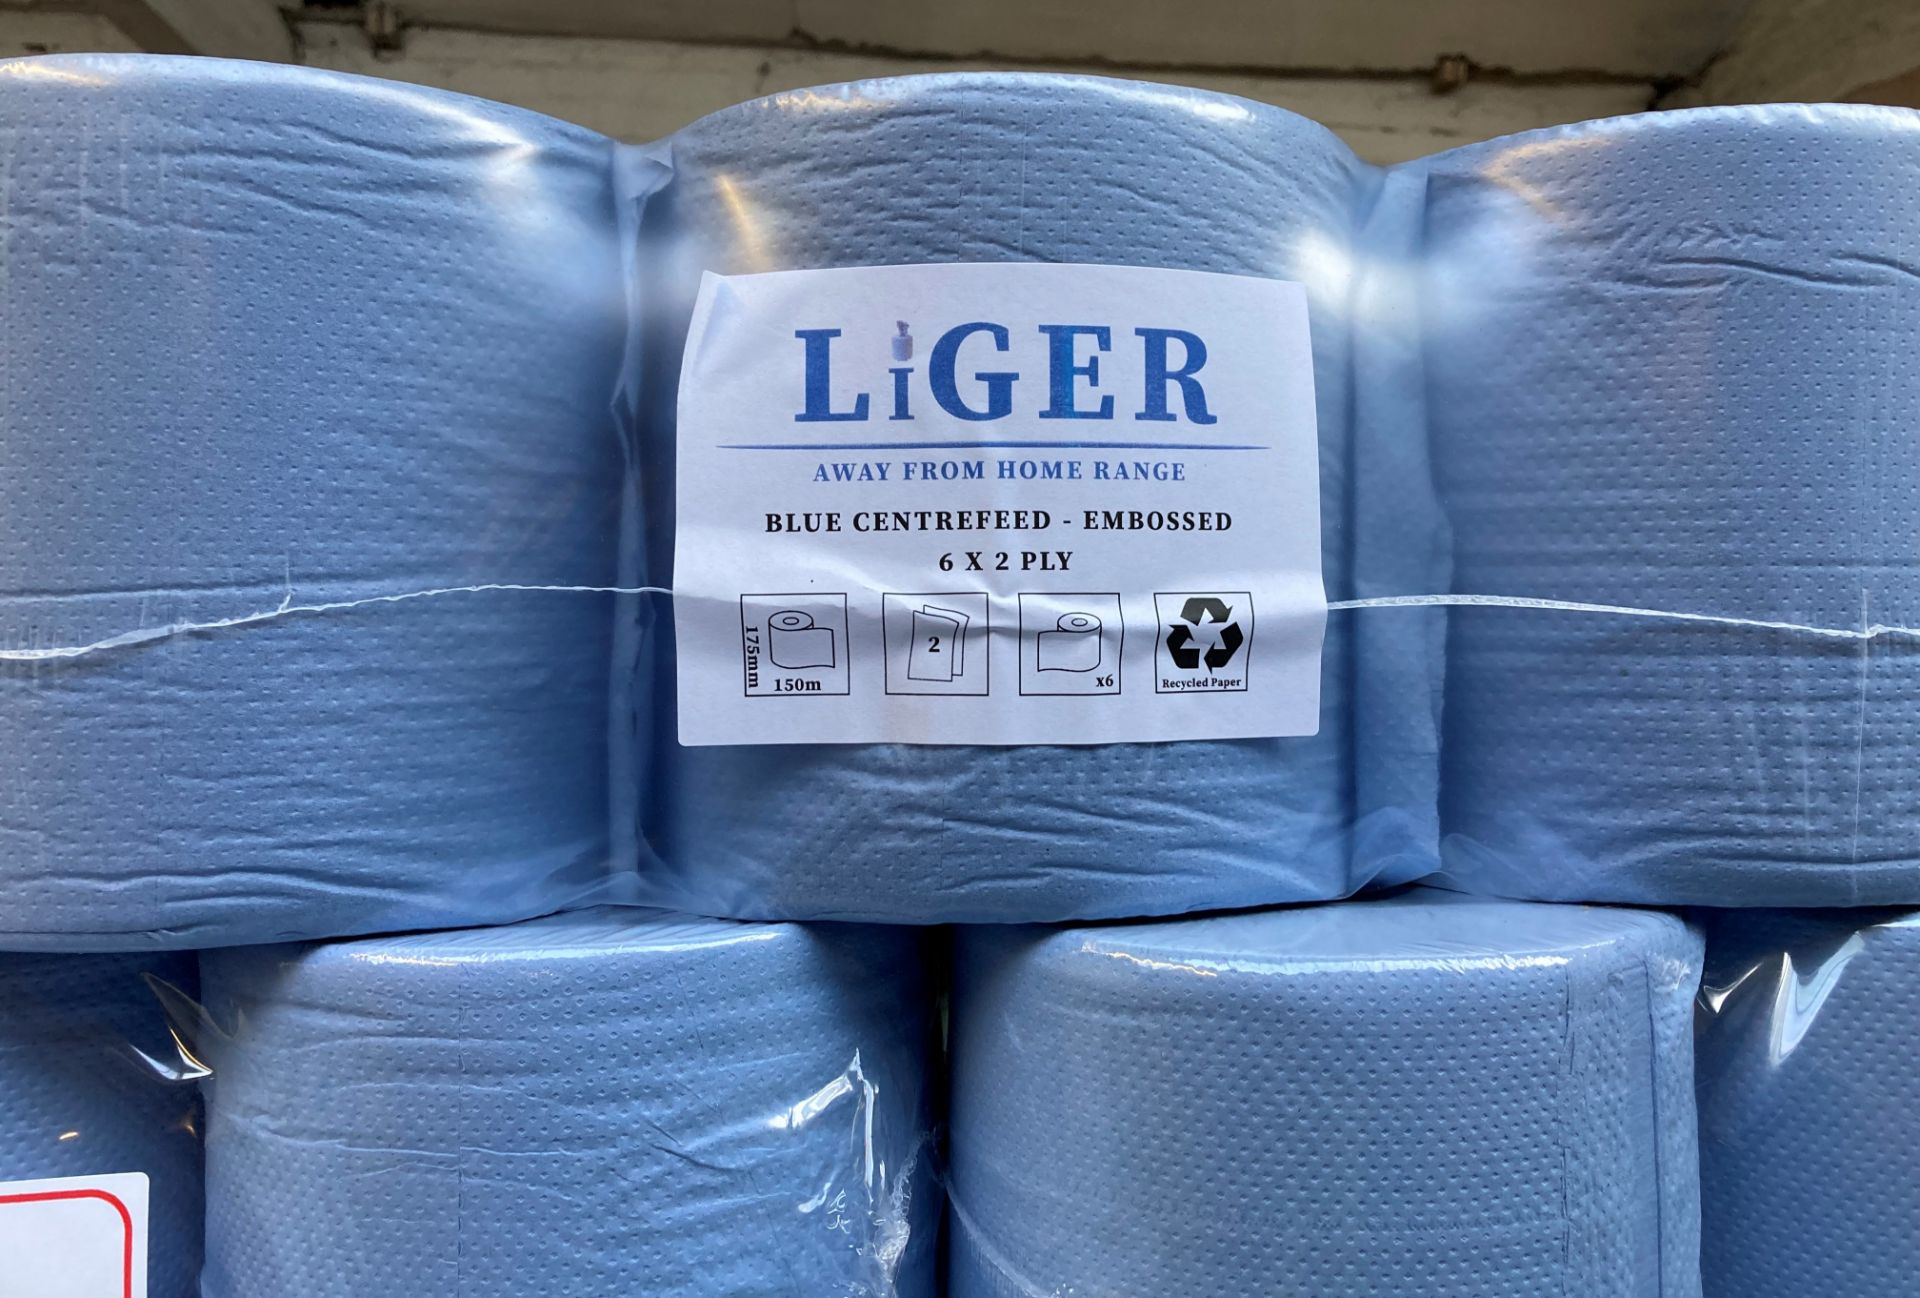 Contents to pallet - 42 x 6x2-ply packs LiGer blue centre feed paper towel rolls and 2 x packs of - Image 3 of 4